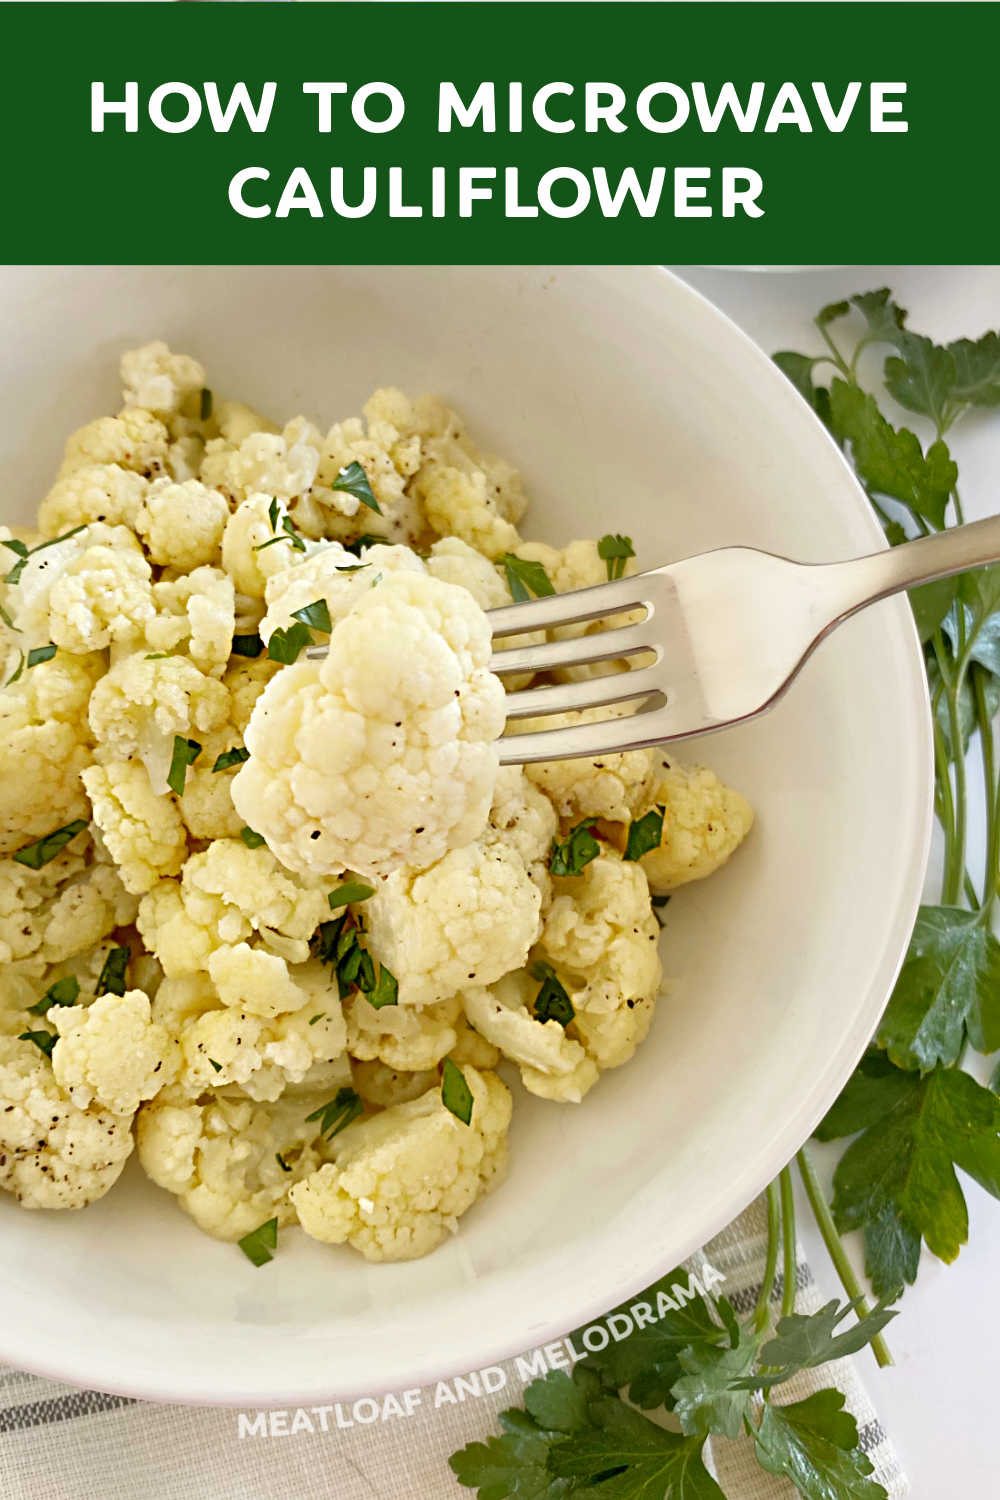 Microwave cauliflower with butter, salt, pepper and garlic for a healthy low carb side dish. Learn how to steam cauliflower in the microwave in just a few minutes with this easy recipe!  via @meamel